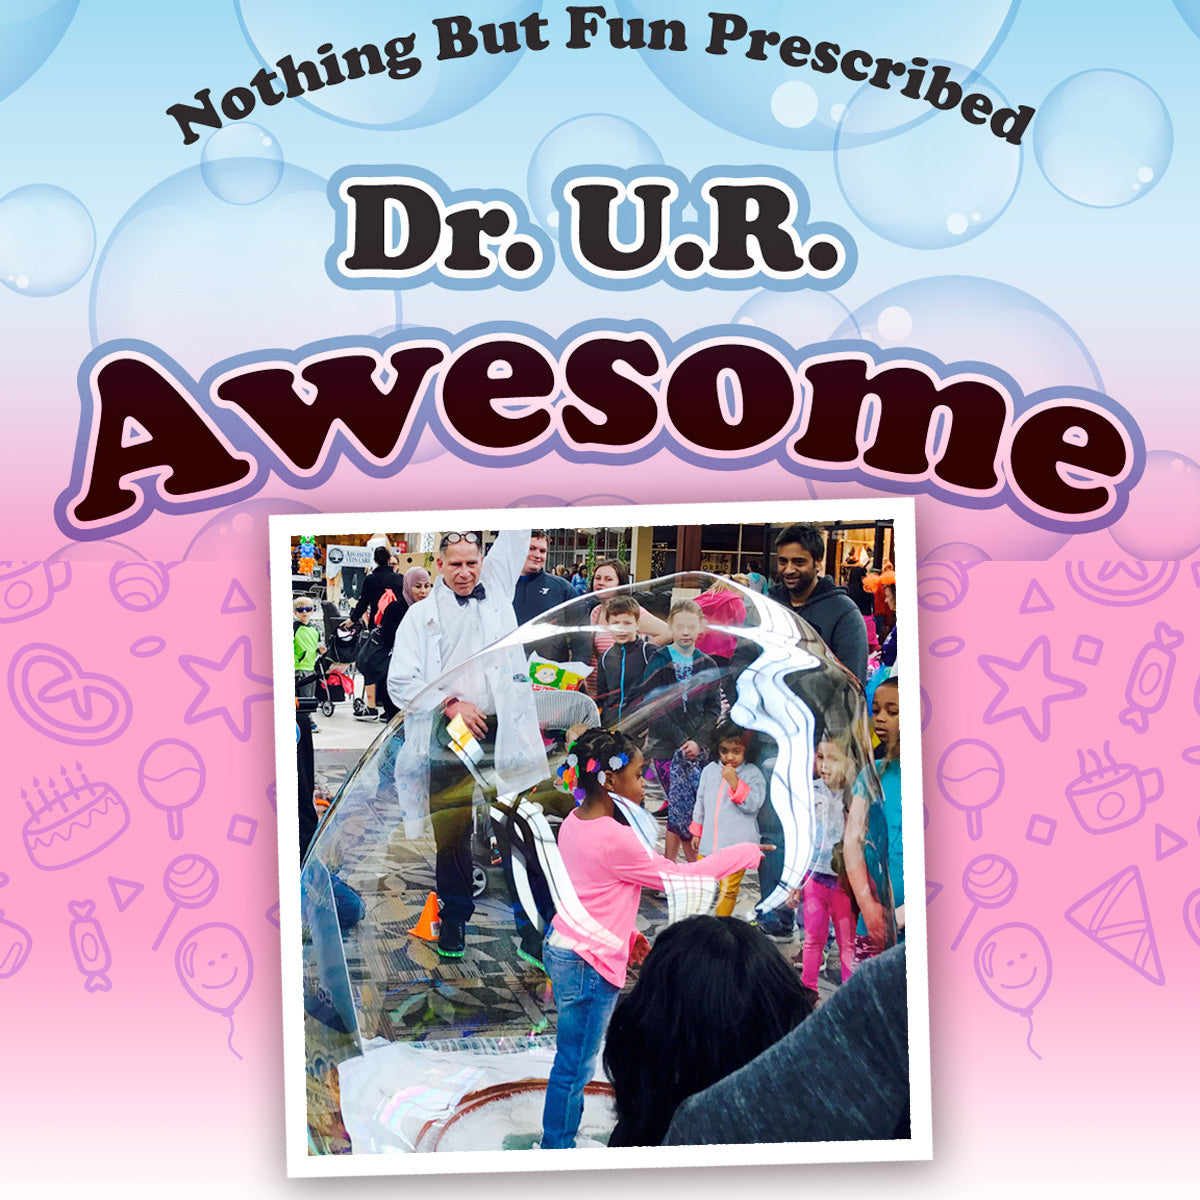 Live Interactive Bubble Show with Dr. U.R. Awesome